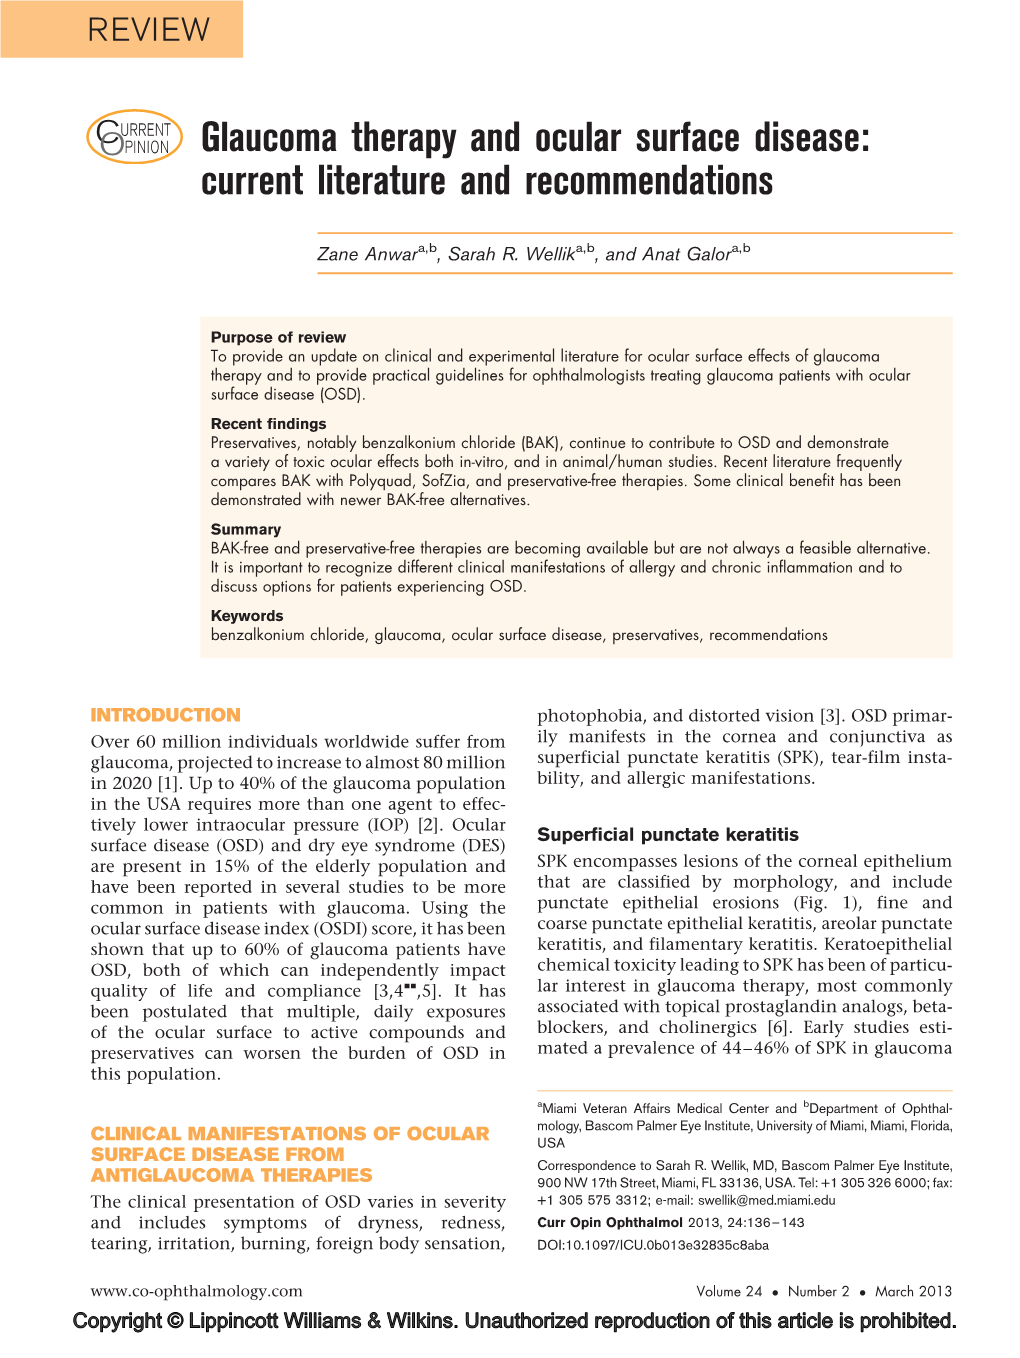 CURRENT OPINION Glaucoma Therapy and Ocular Surface Disease: Current Literature and Recommendations